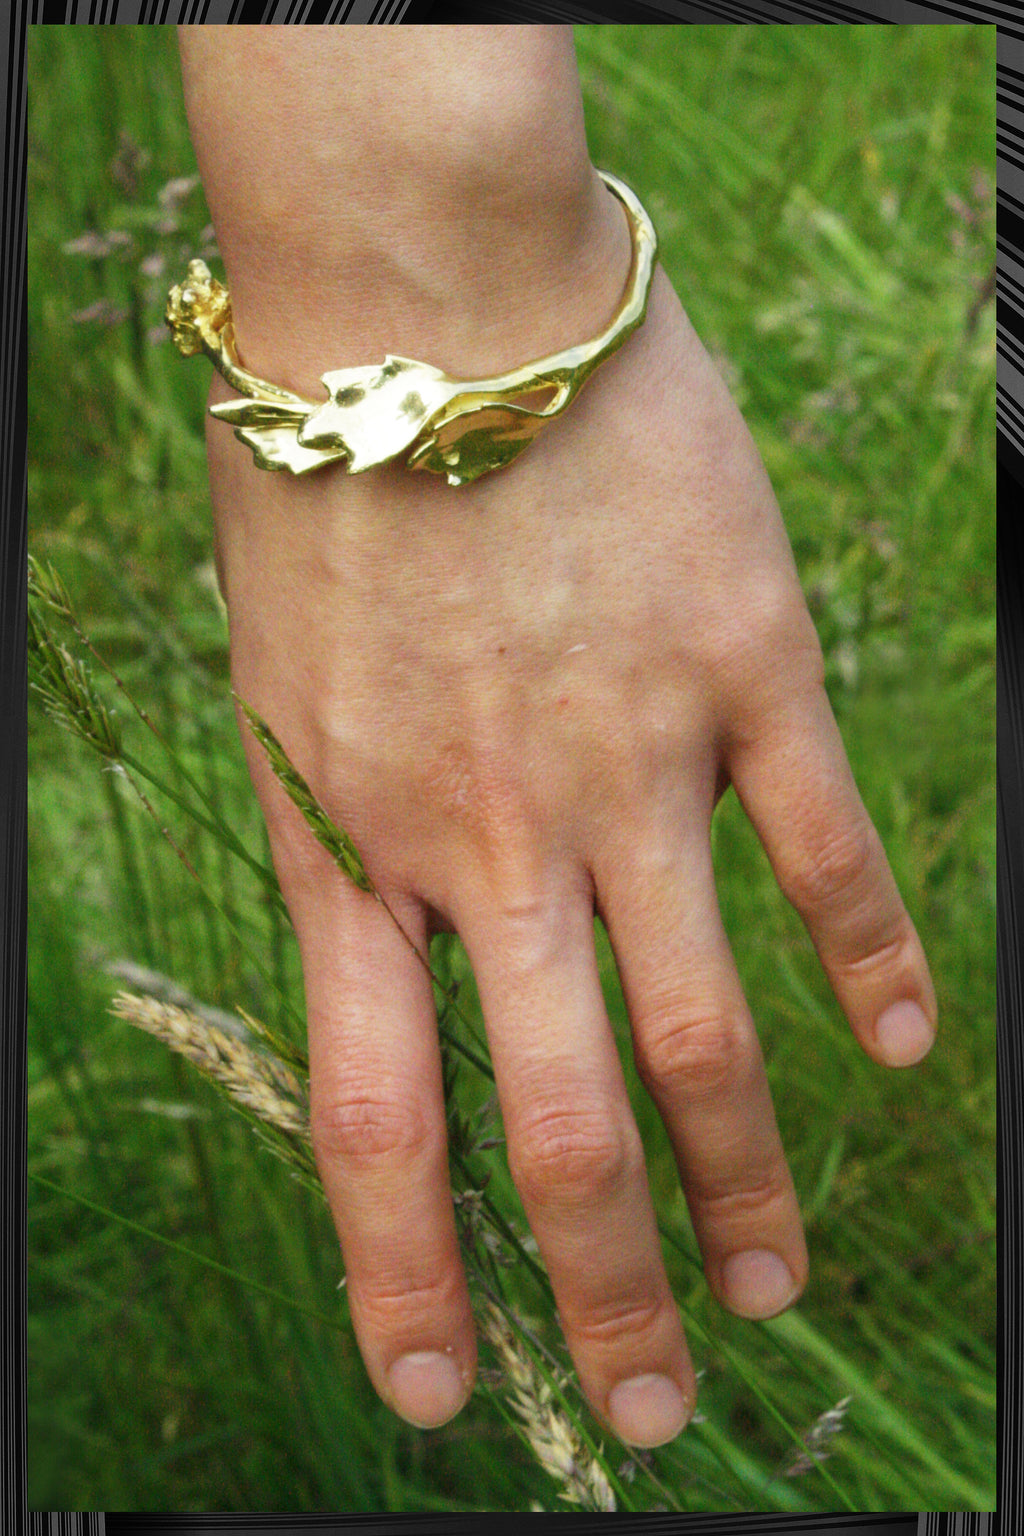 Gold Floreo Bracelet | Free Delivery - Quick Shipping